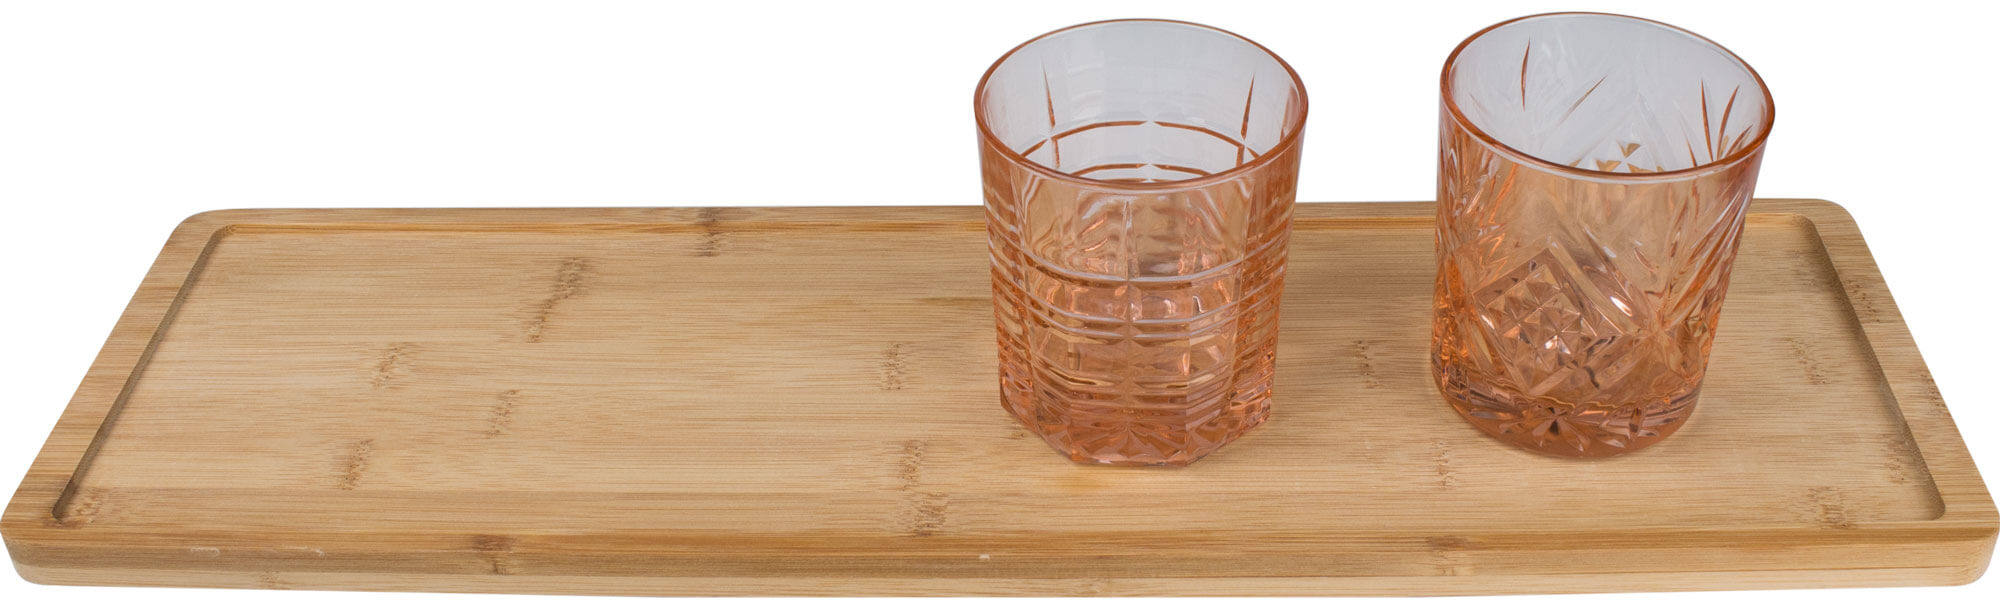 Serving tray bamboo - 53x16,2cm